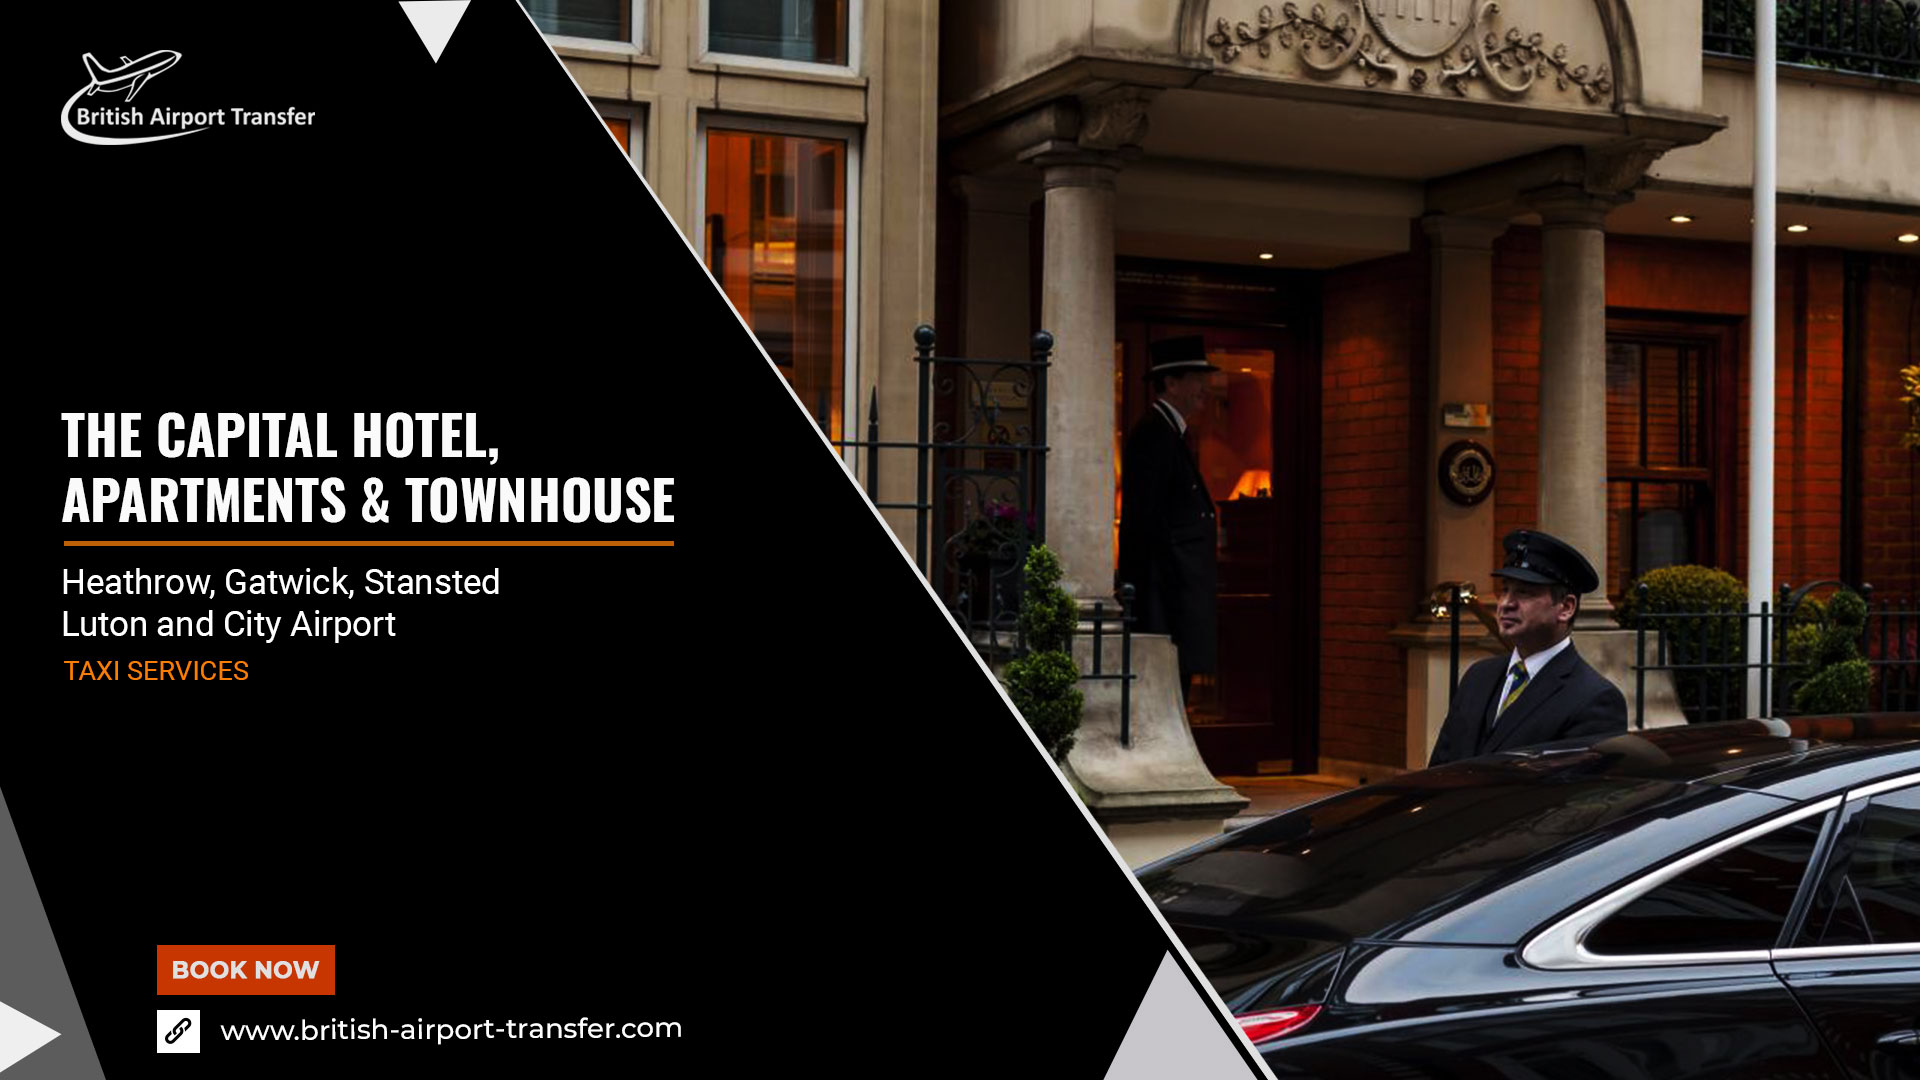 Taxi Cab – The Capital Hotel, Apartments & Townhouse / SW3 1AT